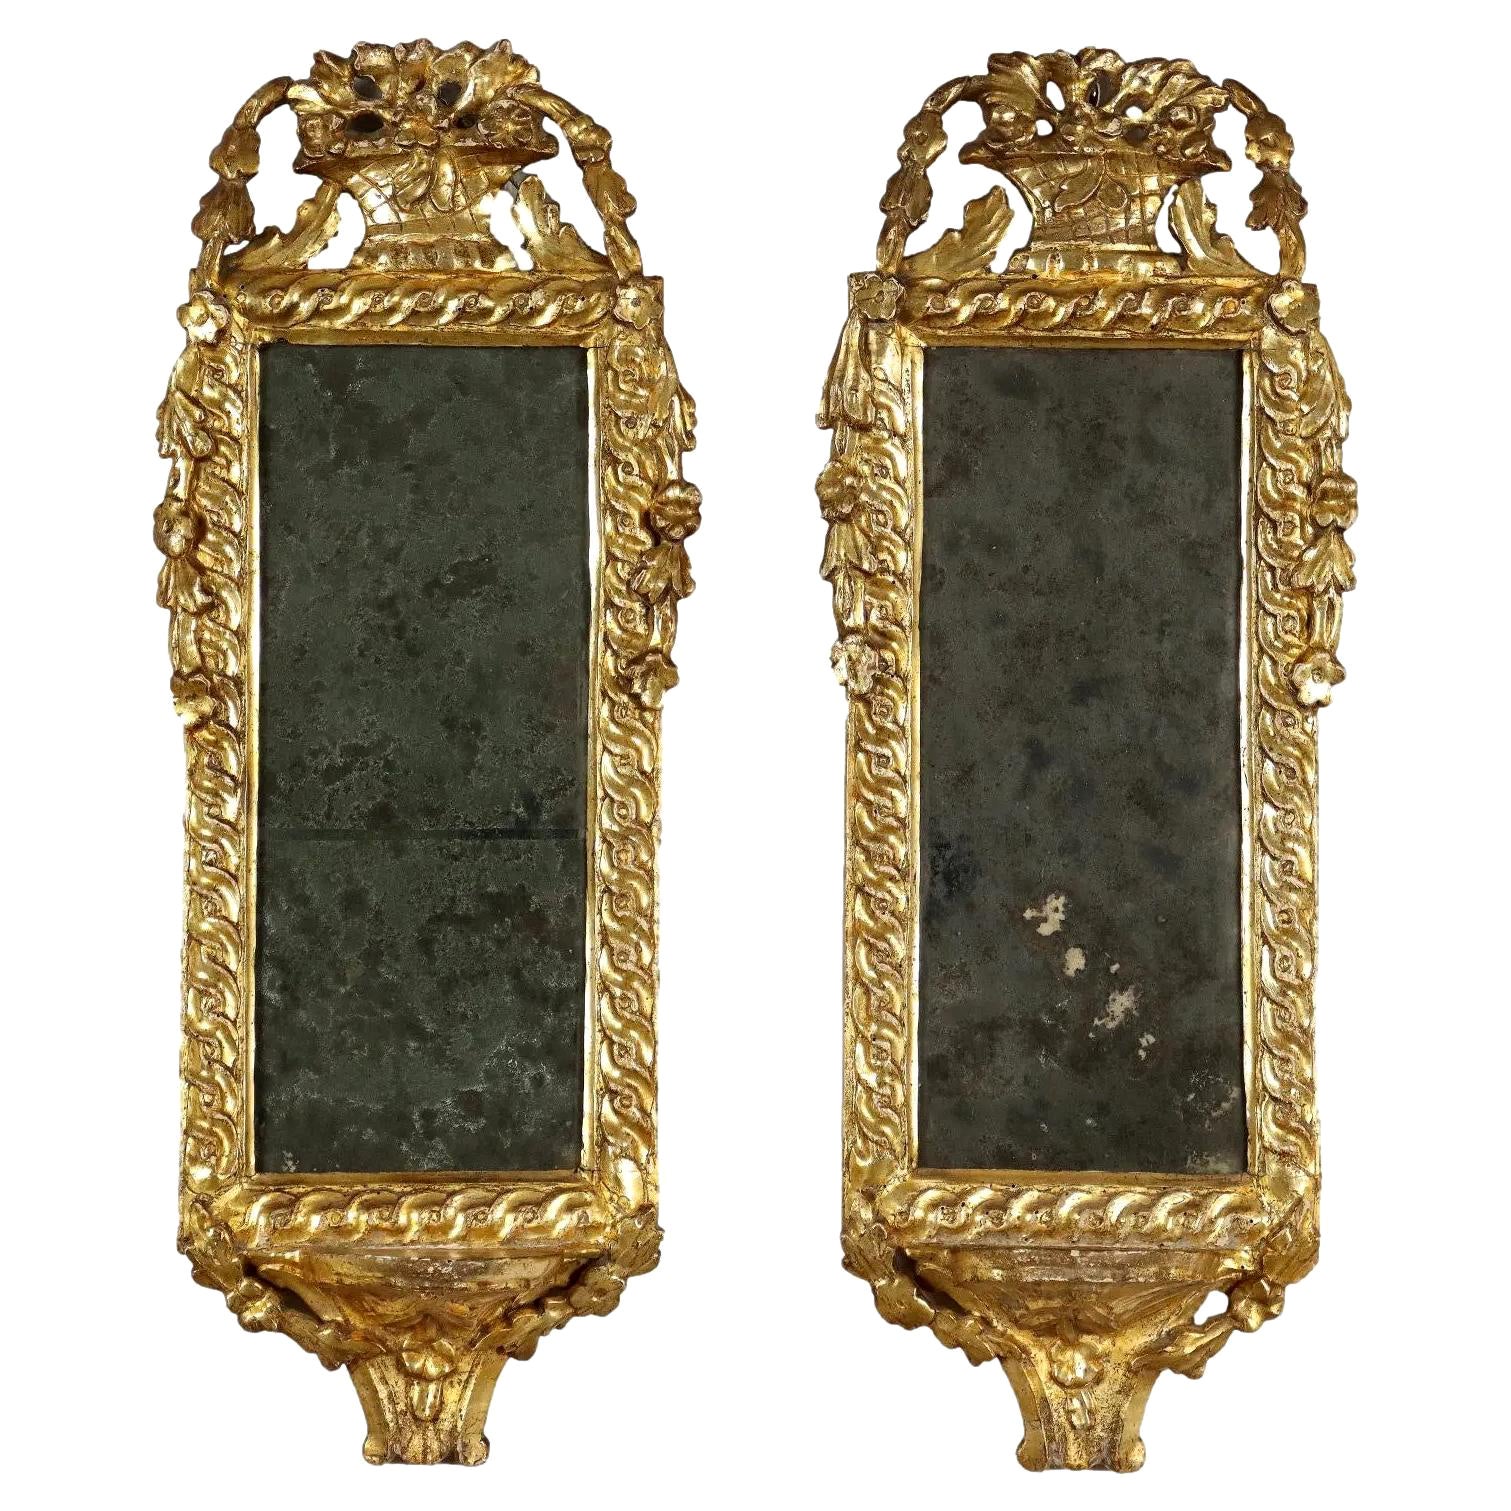 Pair of Italian Neoclassical Giltwood Mirrors - Circa 1780 For Sale